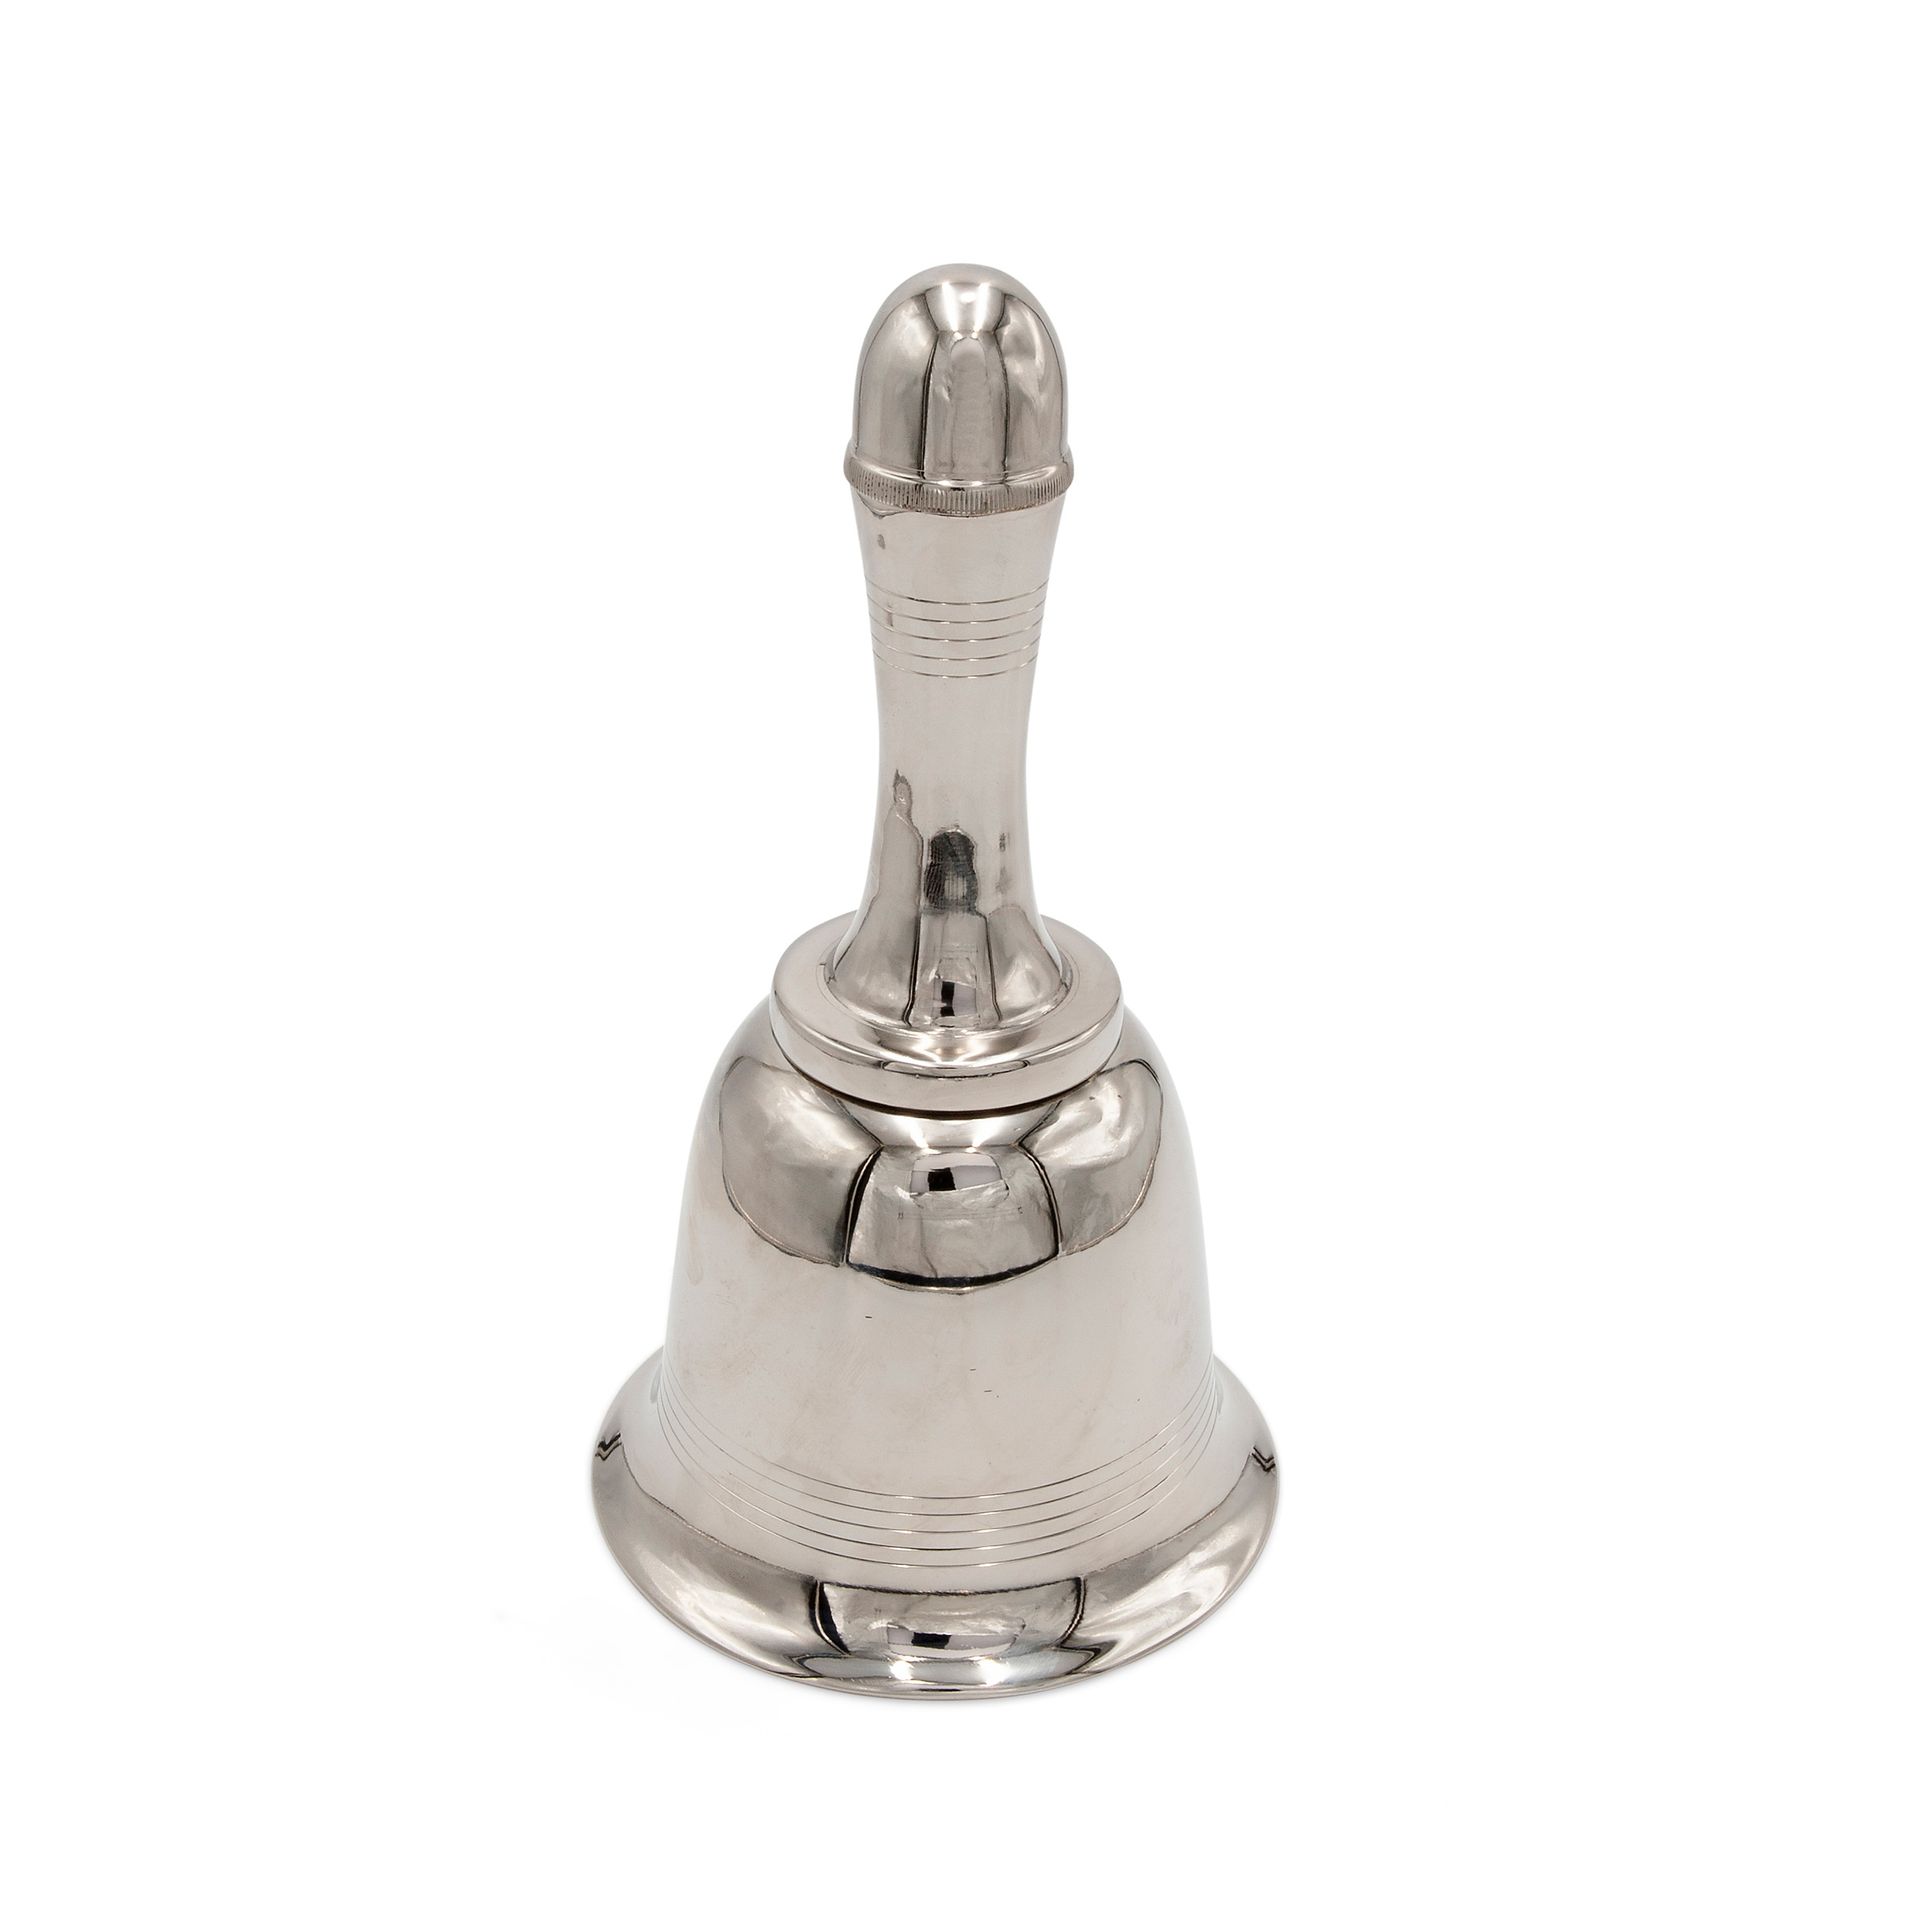 Bell-shaped cocktail shaker, Edward & Sons style, circa 1930 Made of chromed met&hellip;